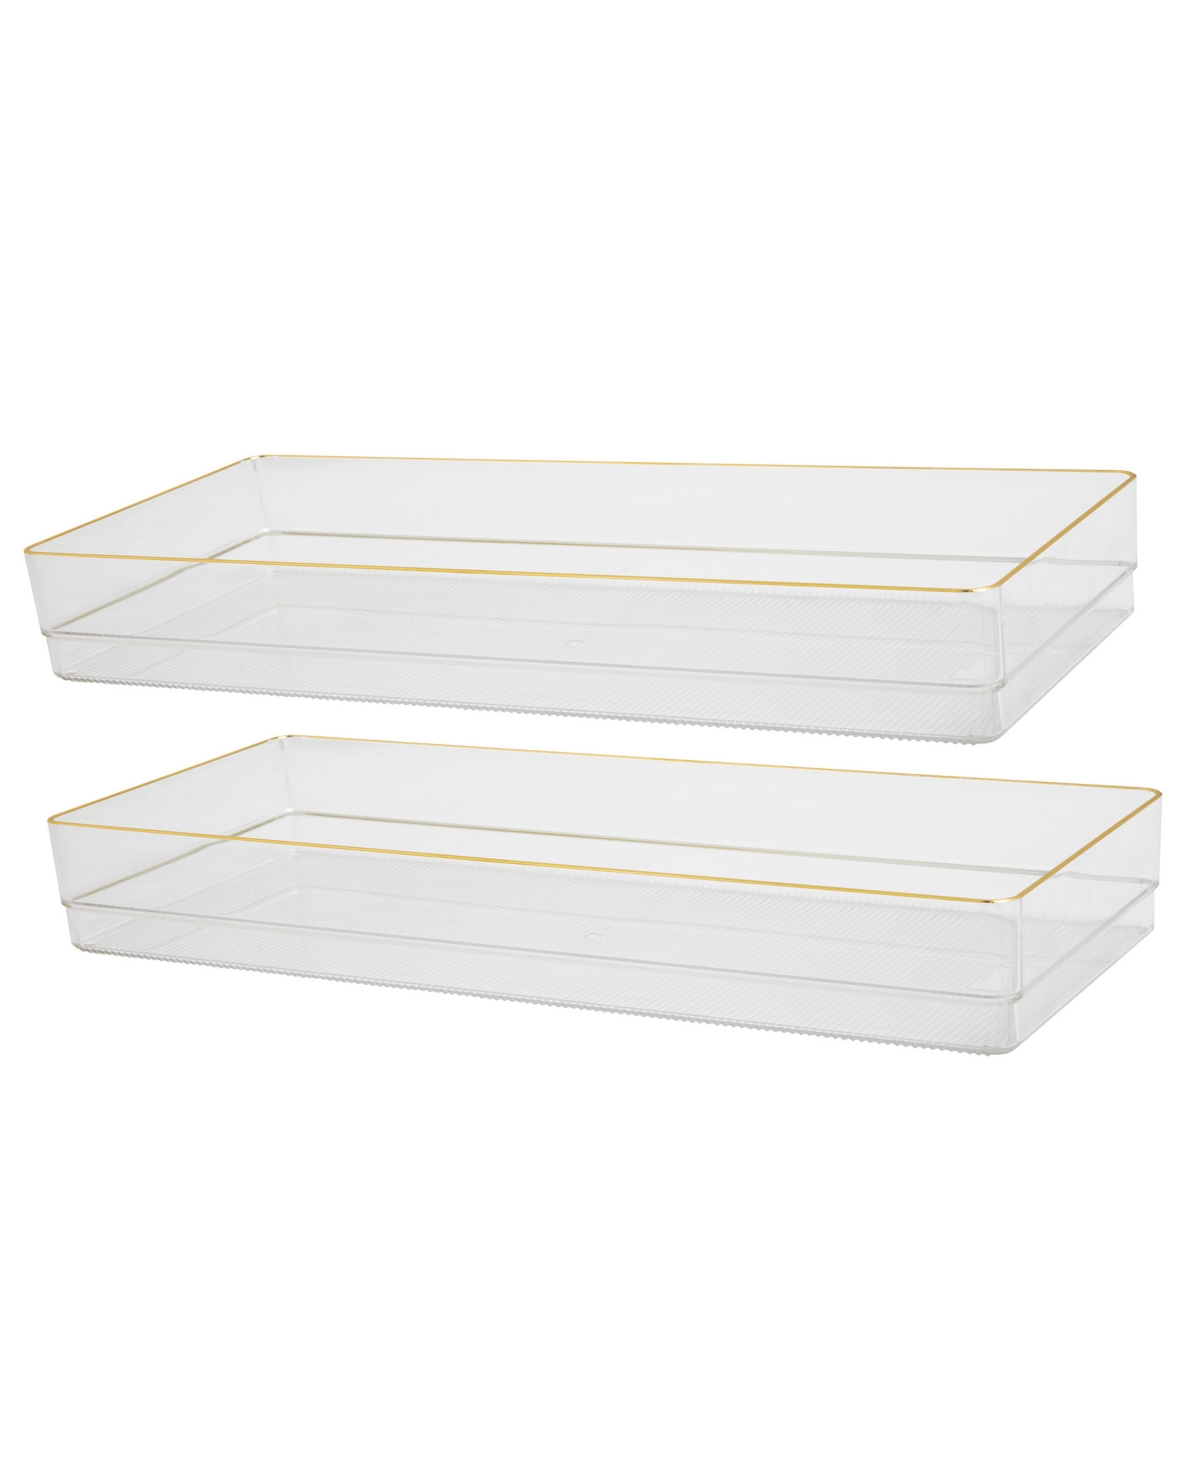 Kerry 2 Piece Plastic Stackable Office Desk Drawer Organizers, 15" x 6" - Clear, Gold Trim